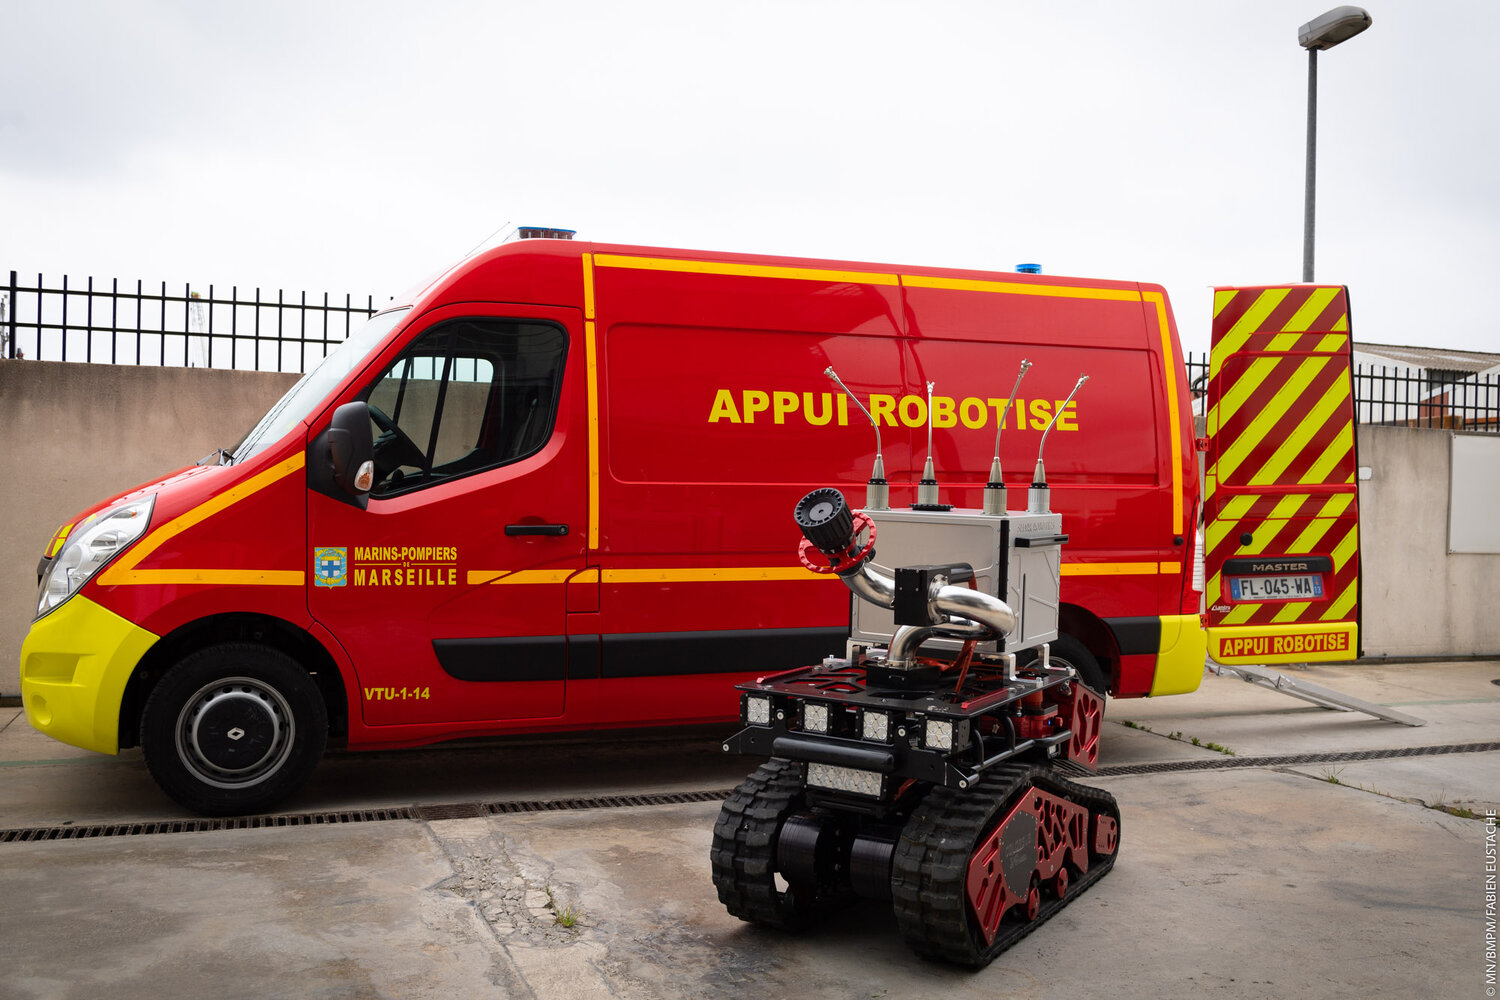 Developed by French company Shark Robotics, in partnership with the Sapeurs-Pompiers de Paris (Paris firefighters) brigade, the design of Colossus Robot is versatile to adapt to many different unsafe and hazardous  situations